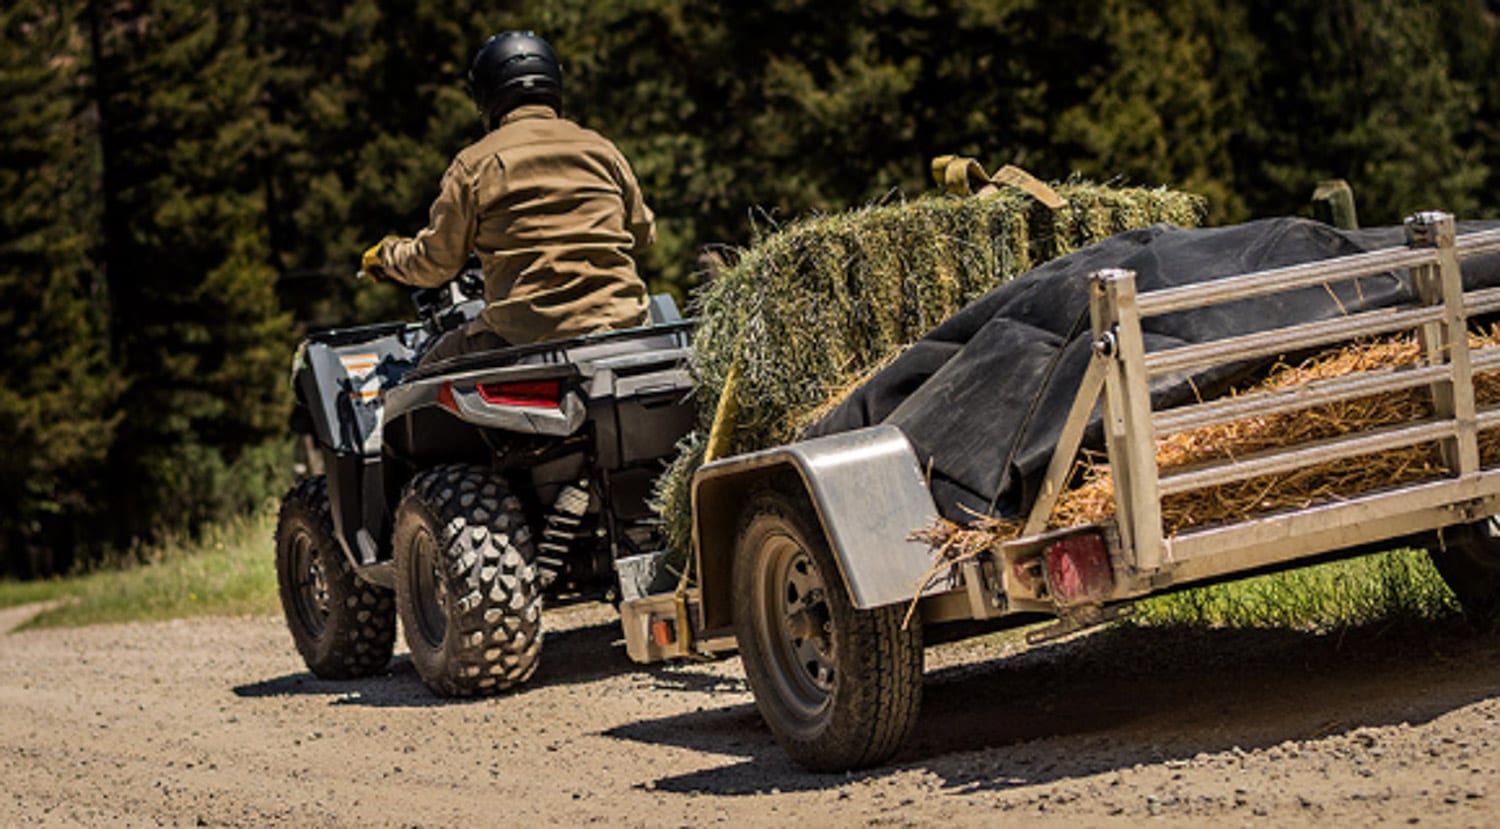 Towing with an ATV